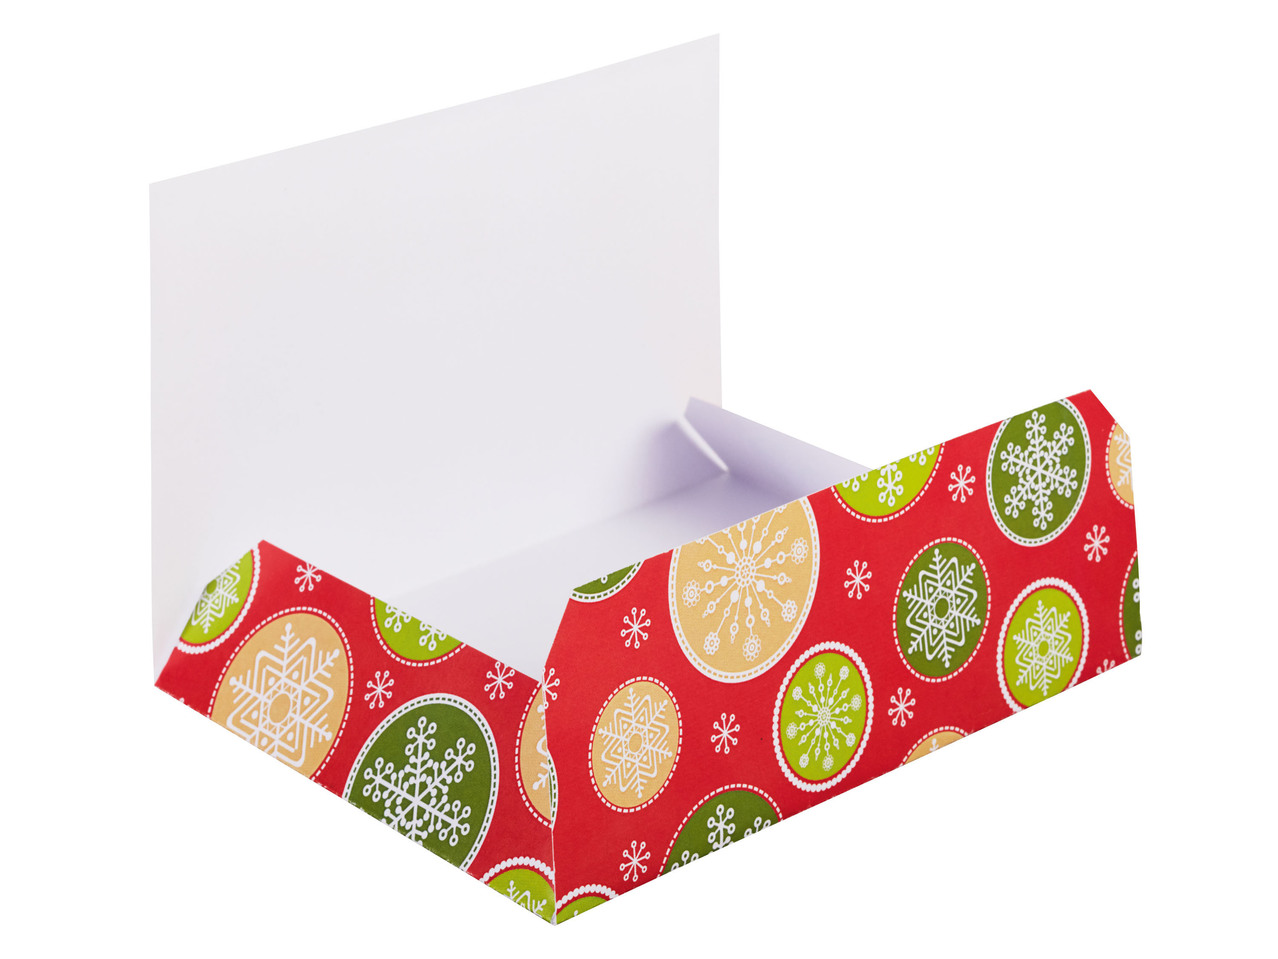 Folders, Envelopes or 3D Christmas Cards, 2 pieces